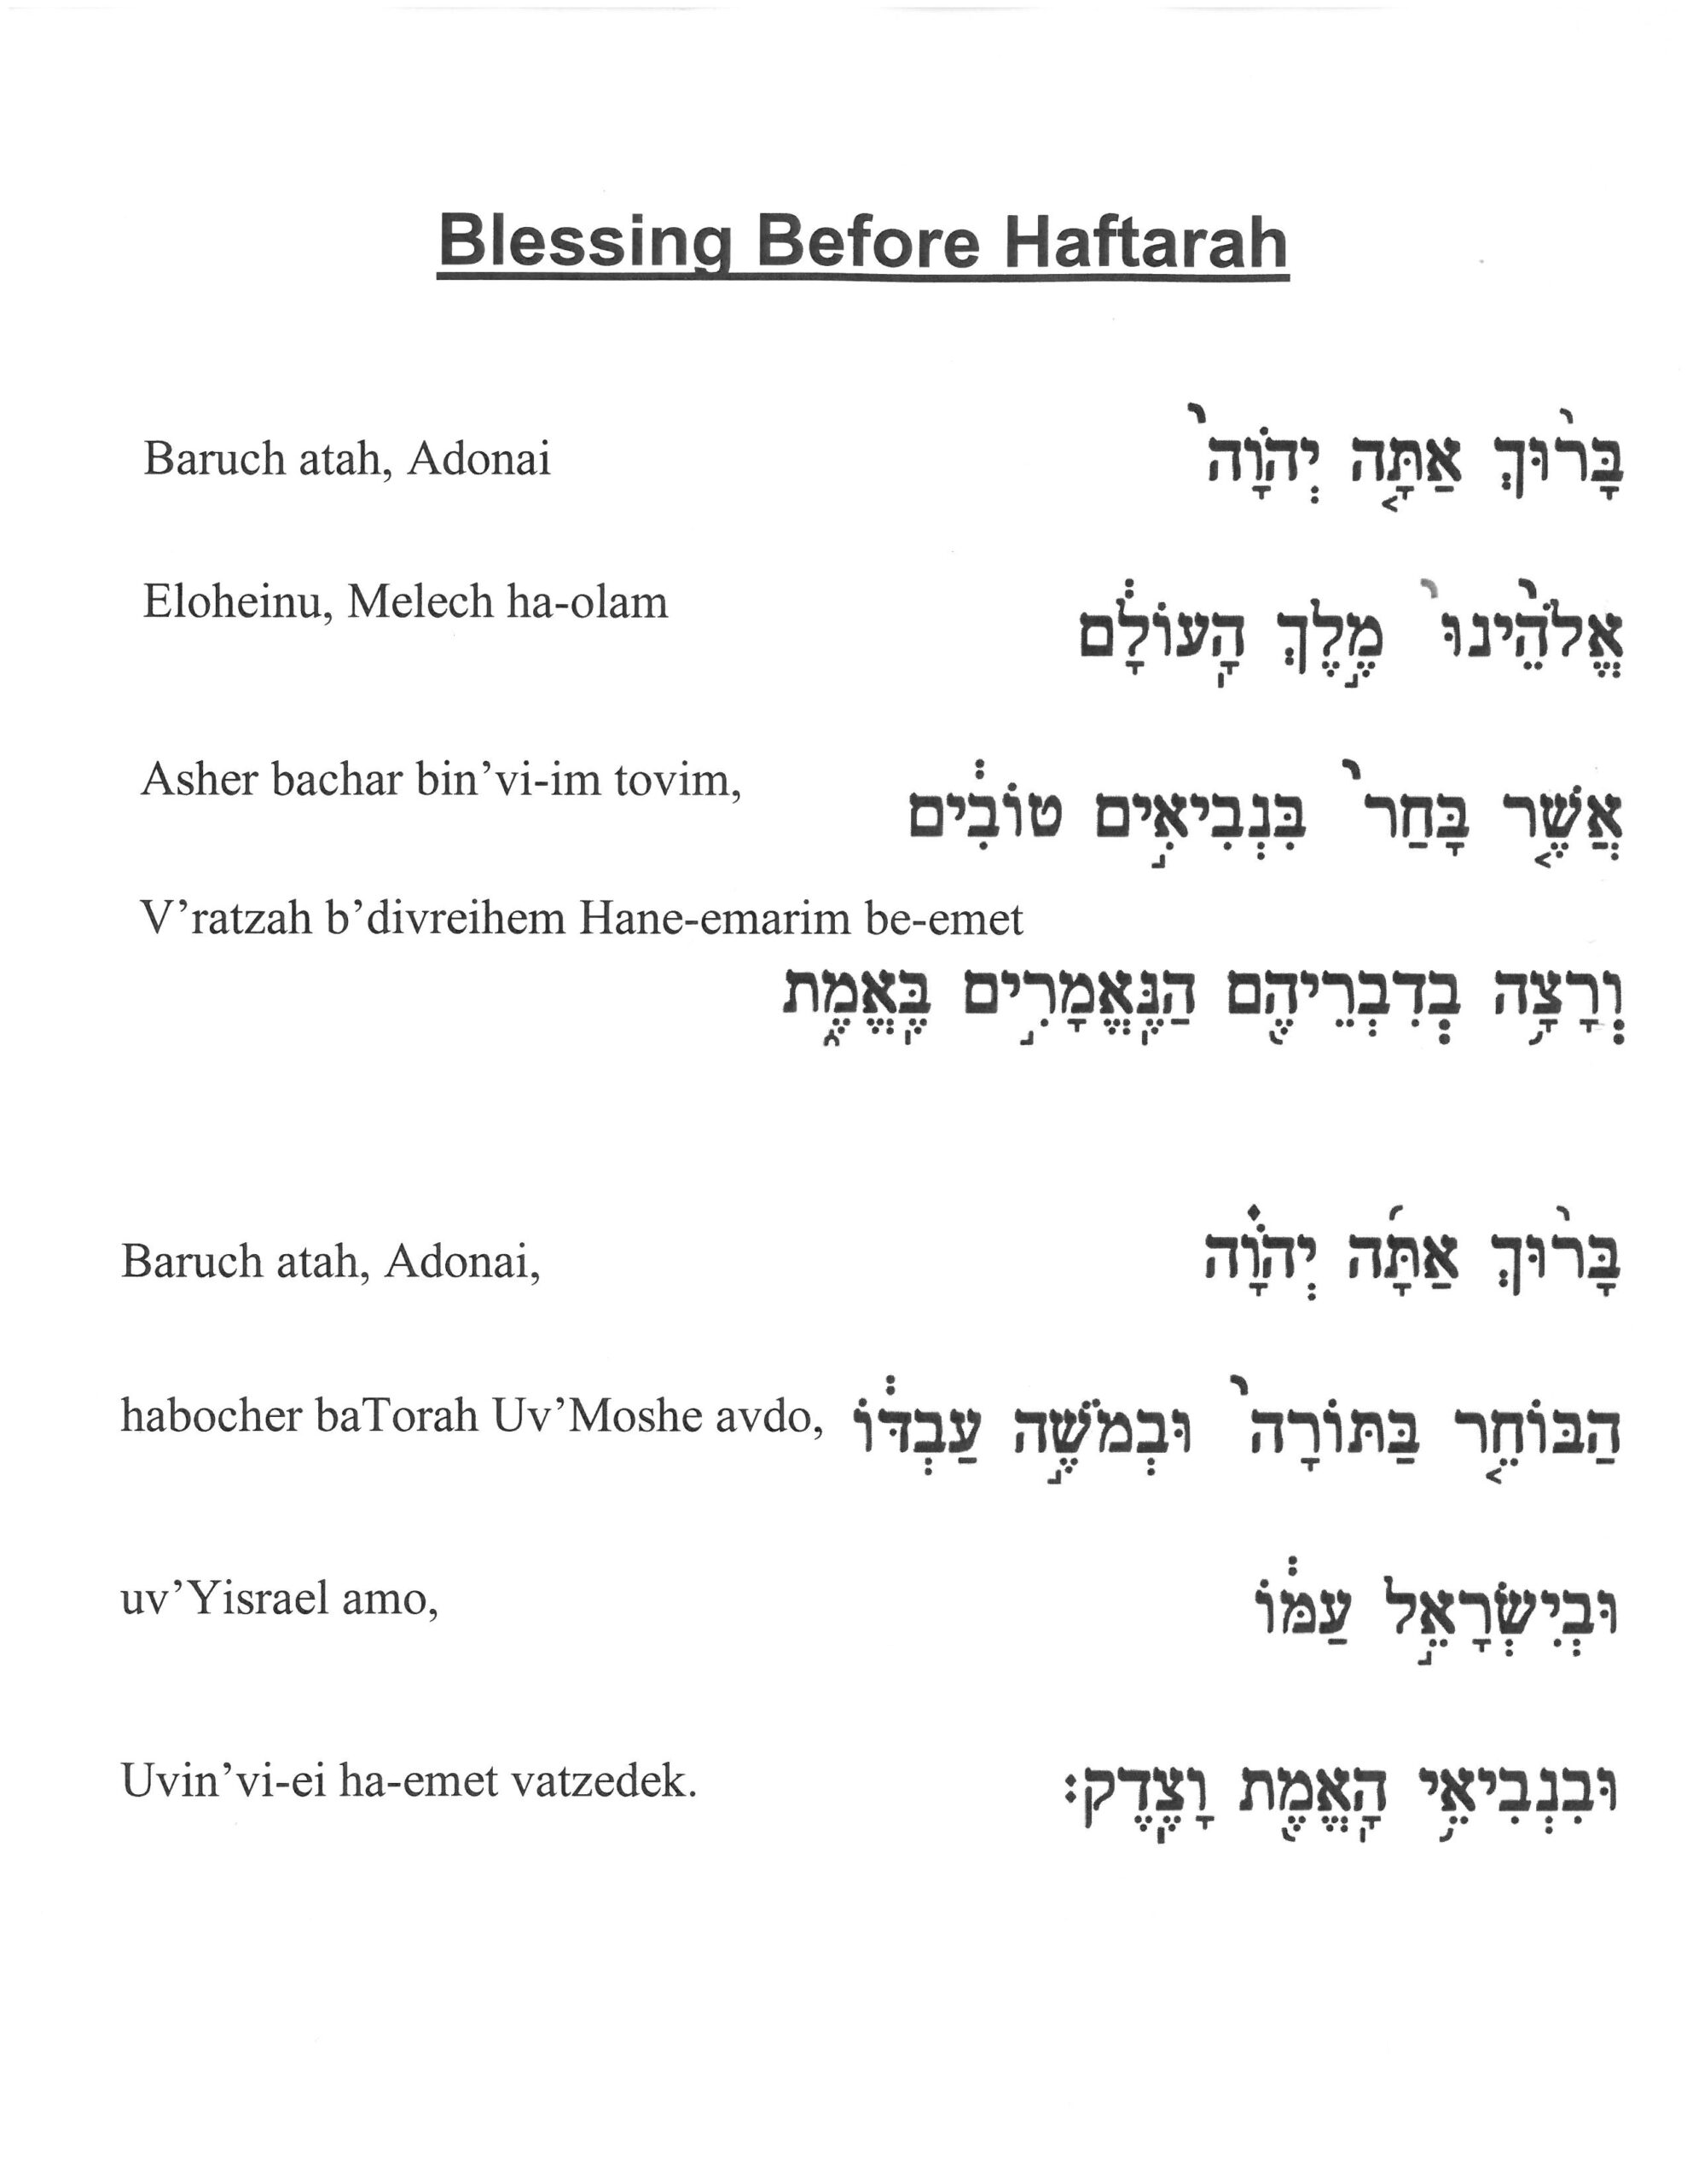 Blessing Before Haftarah with transliteration and trope